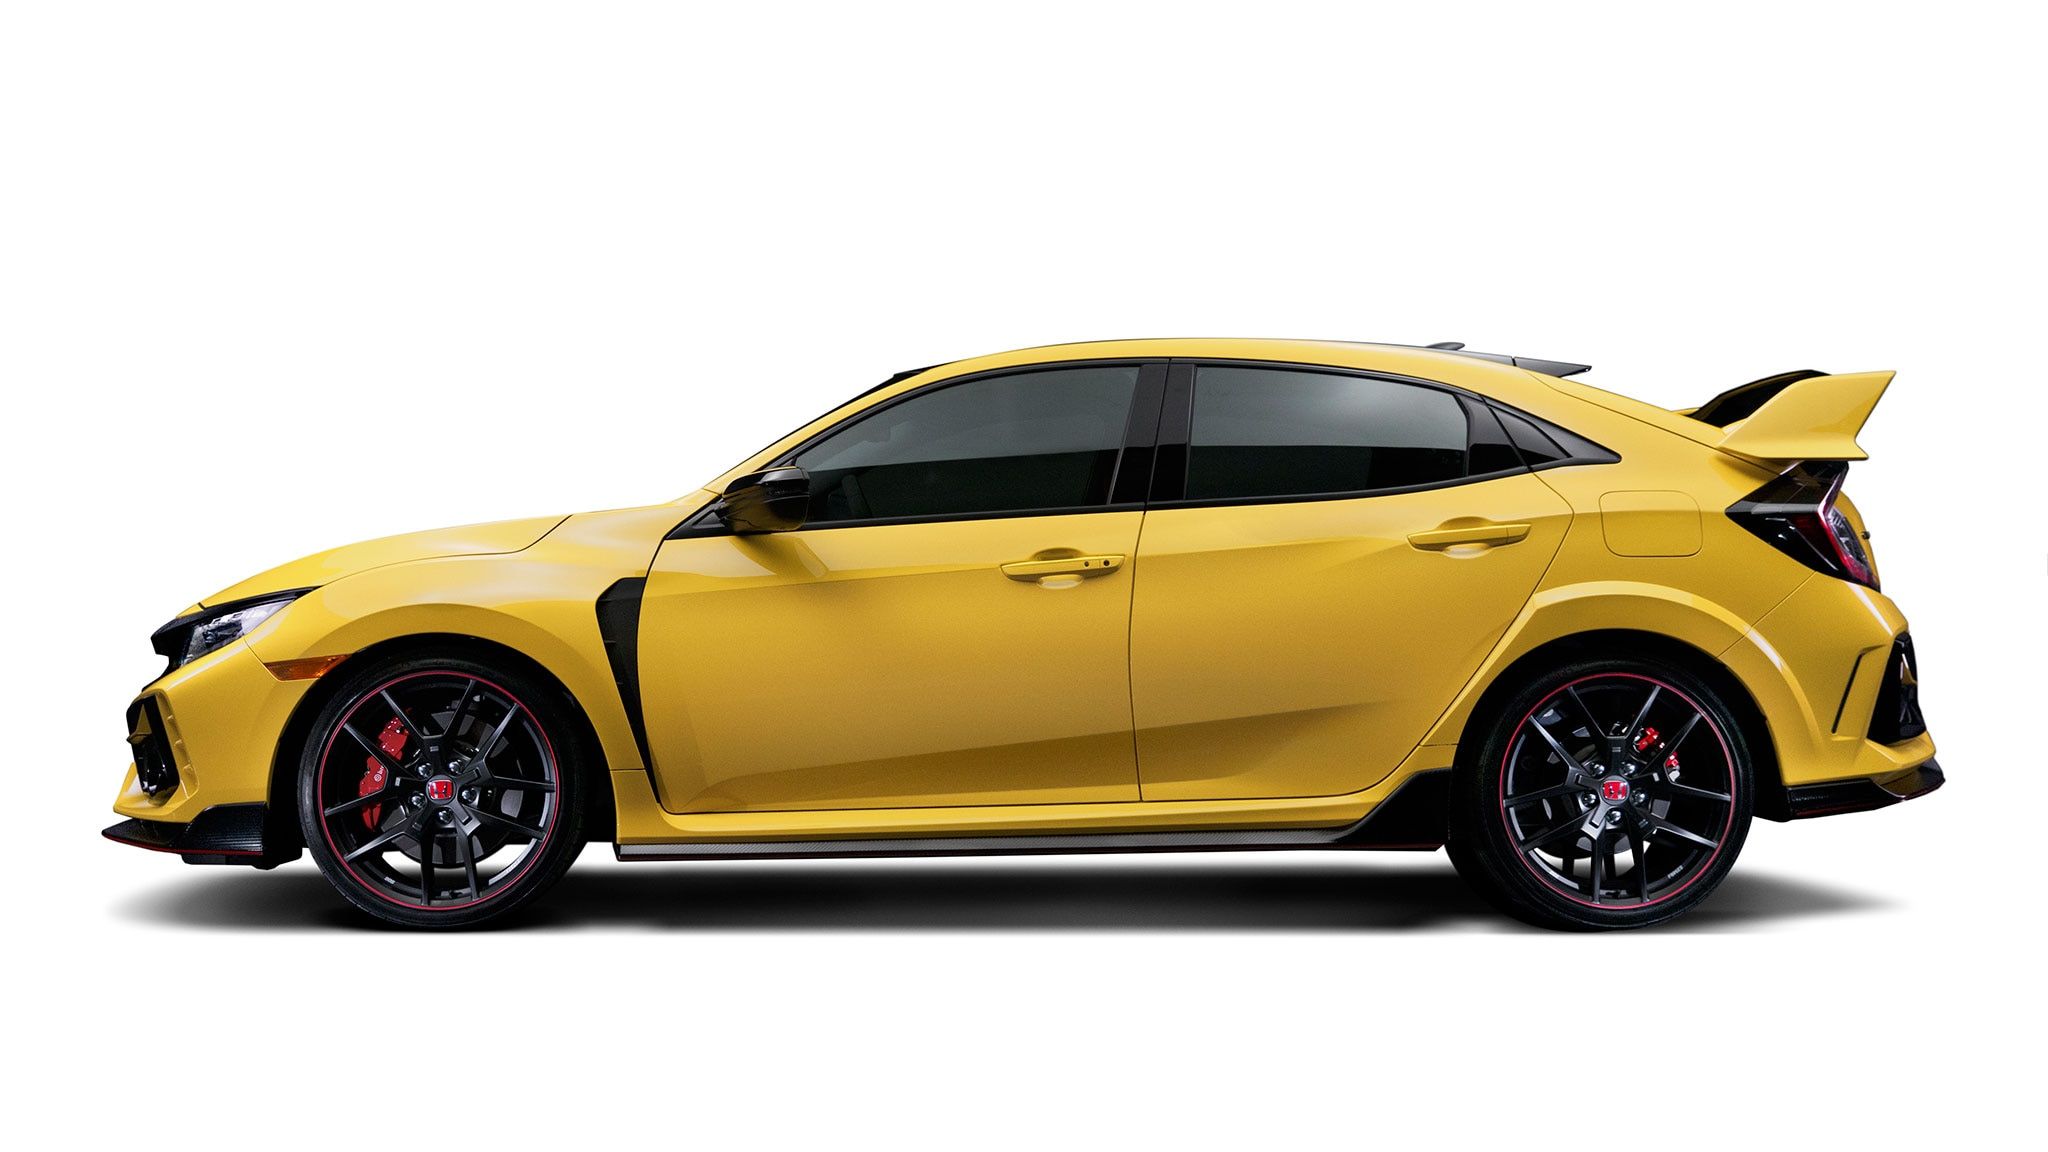 Honda Civic Type R Limited Edition: Lighter, Yellow, And Re Tuned